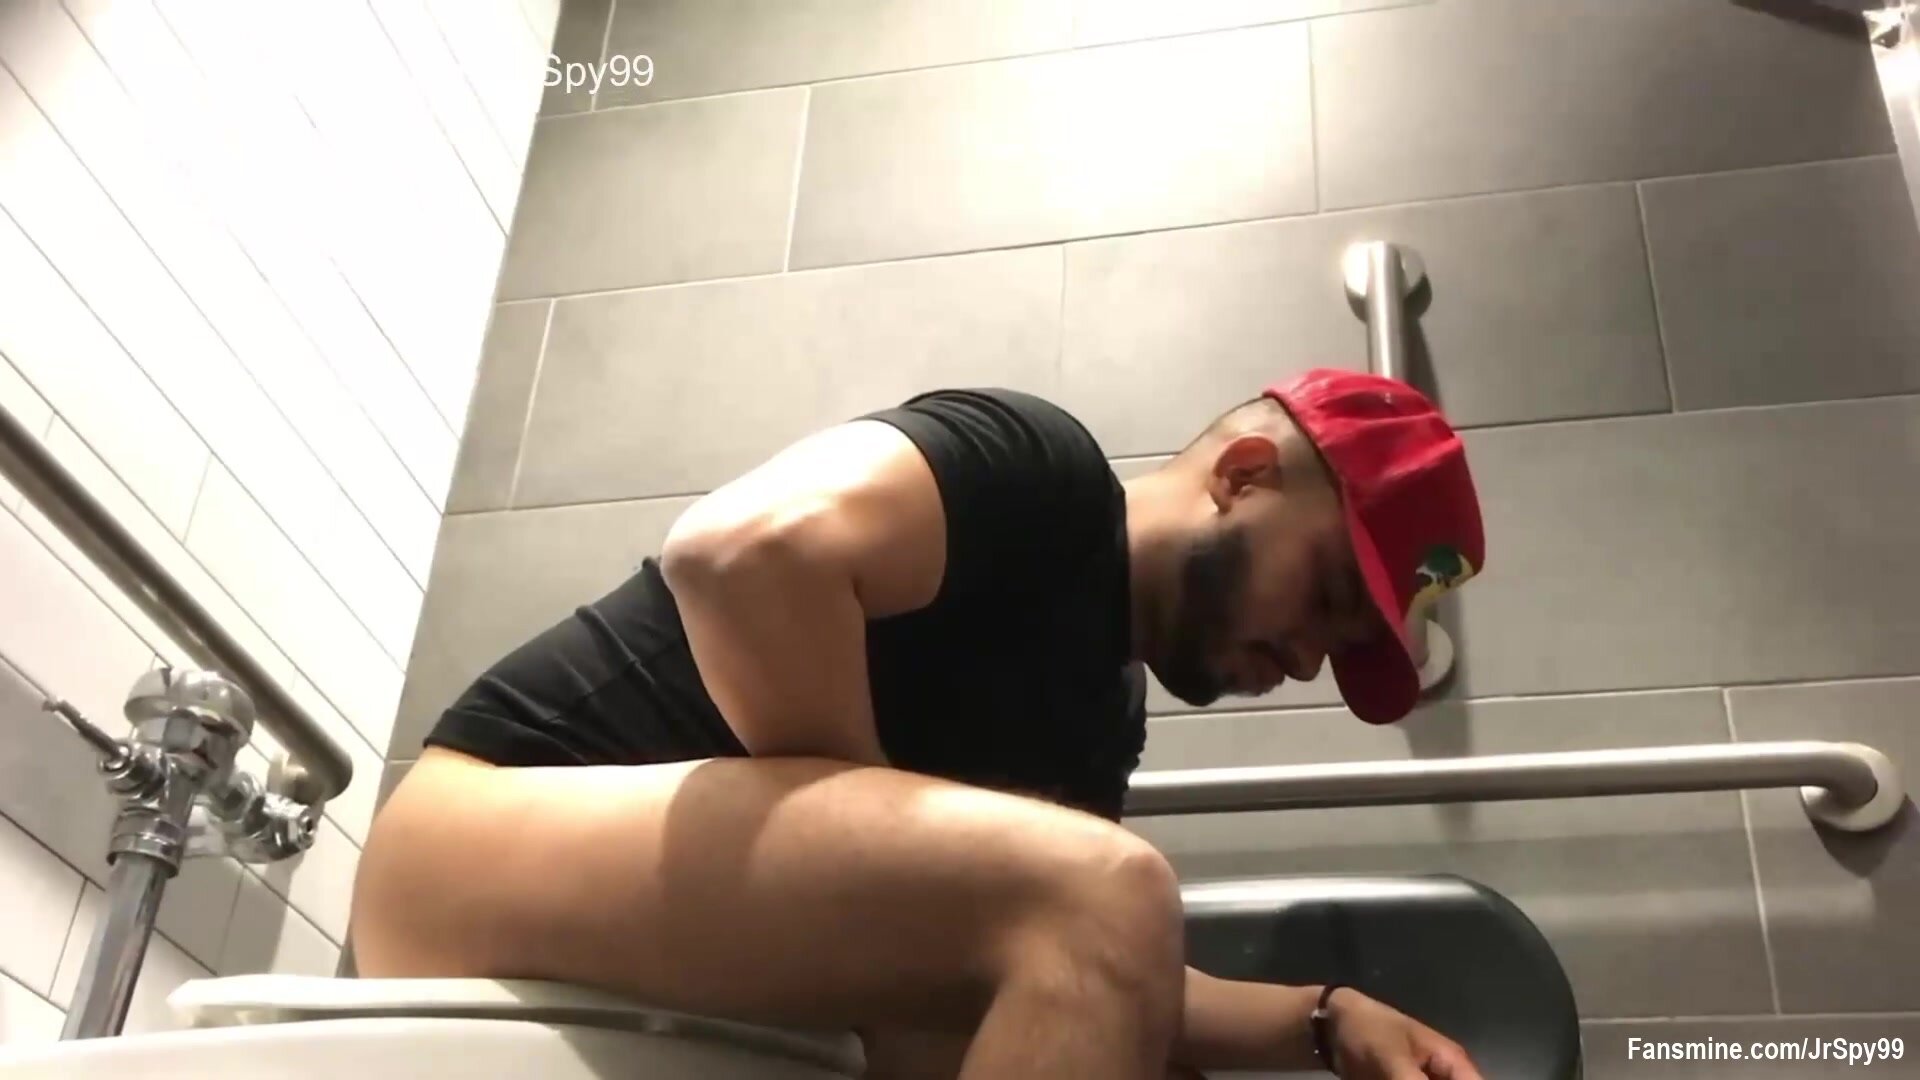 Spy: Hot guy on the toilet with wipe